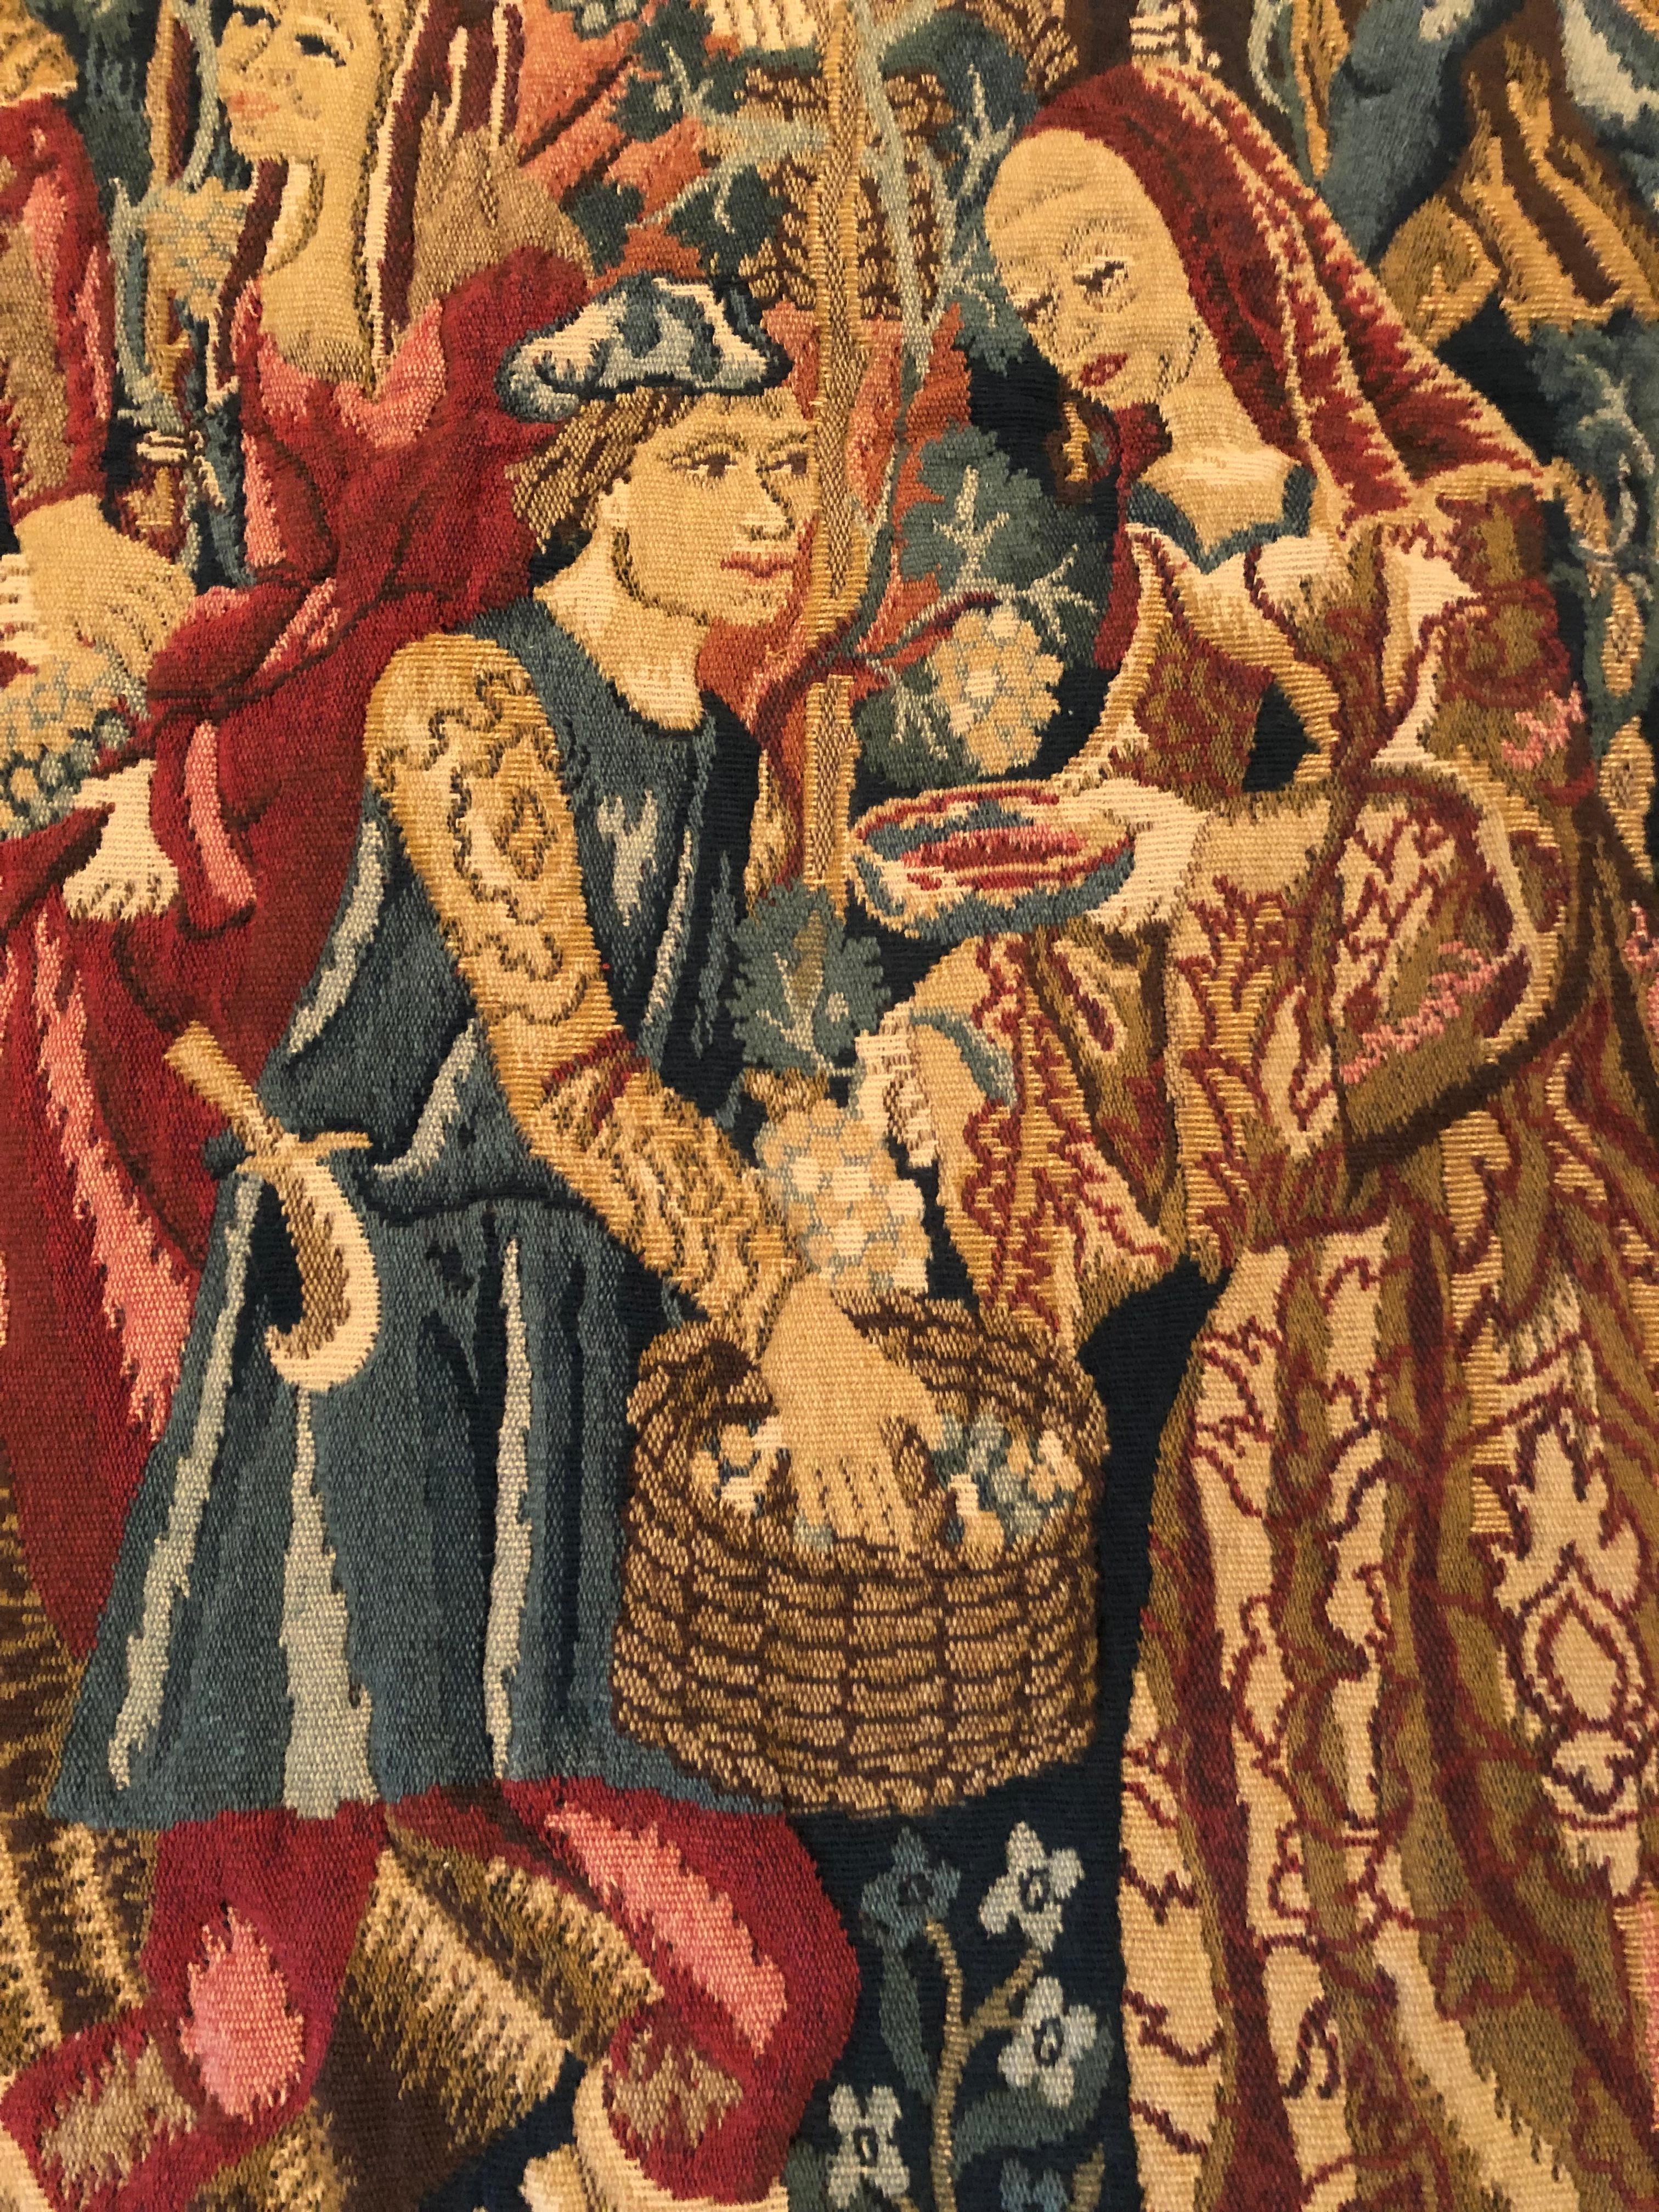 Beautiful richly colored and detailed woven tapestry which is a reproduction of a 14th century French tapestry of period dressed figures picking grapes at harvest.   Made in Belgium.  There's a place on the back to insert a wooden rod for hanging.